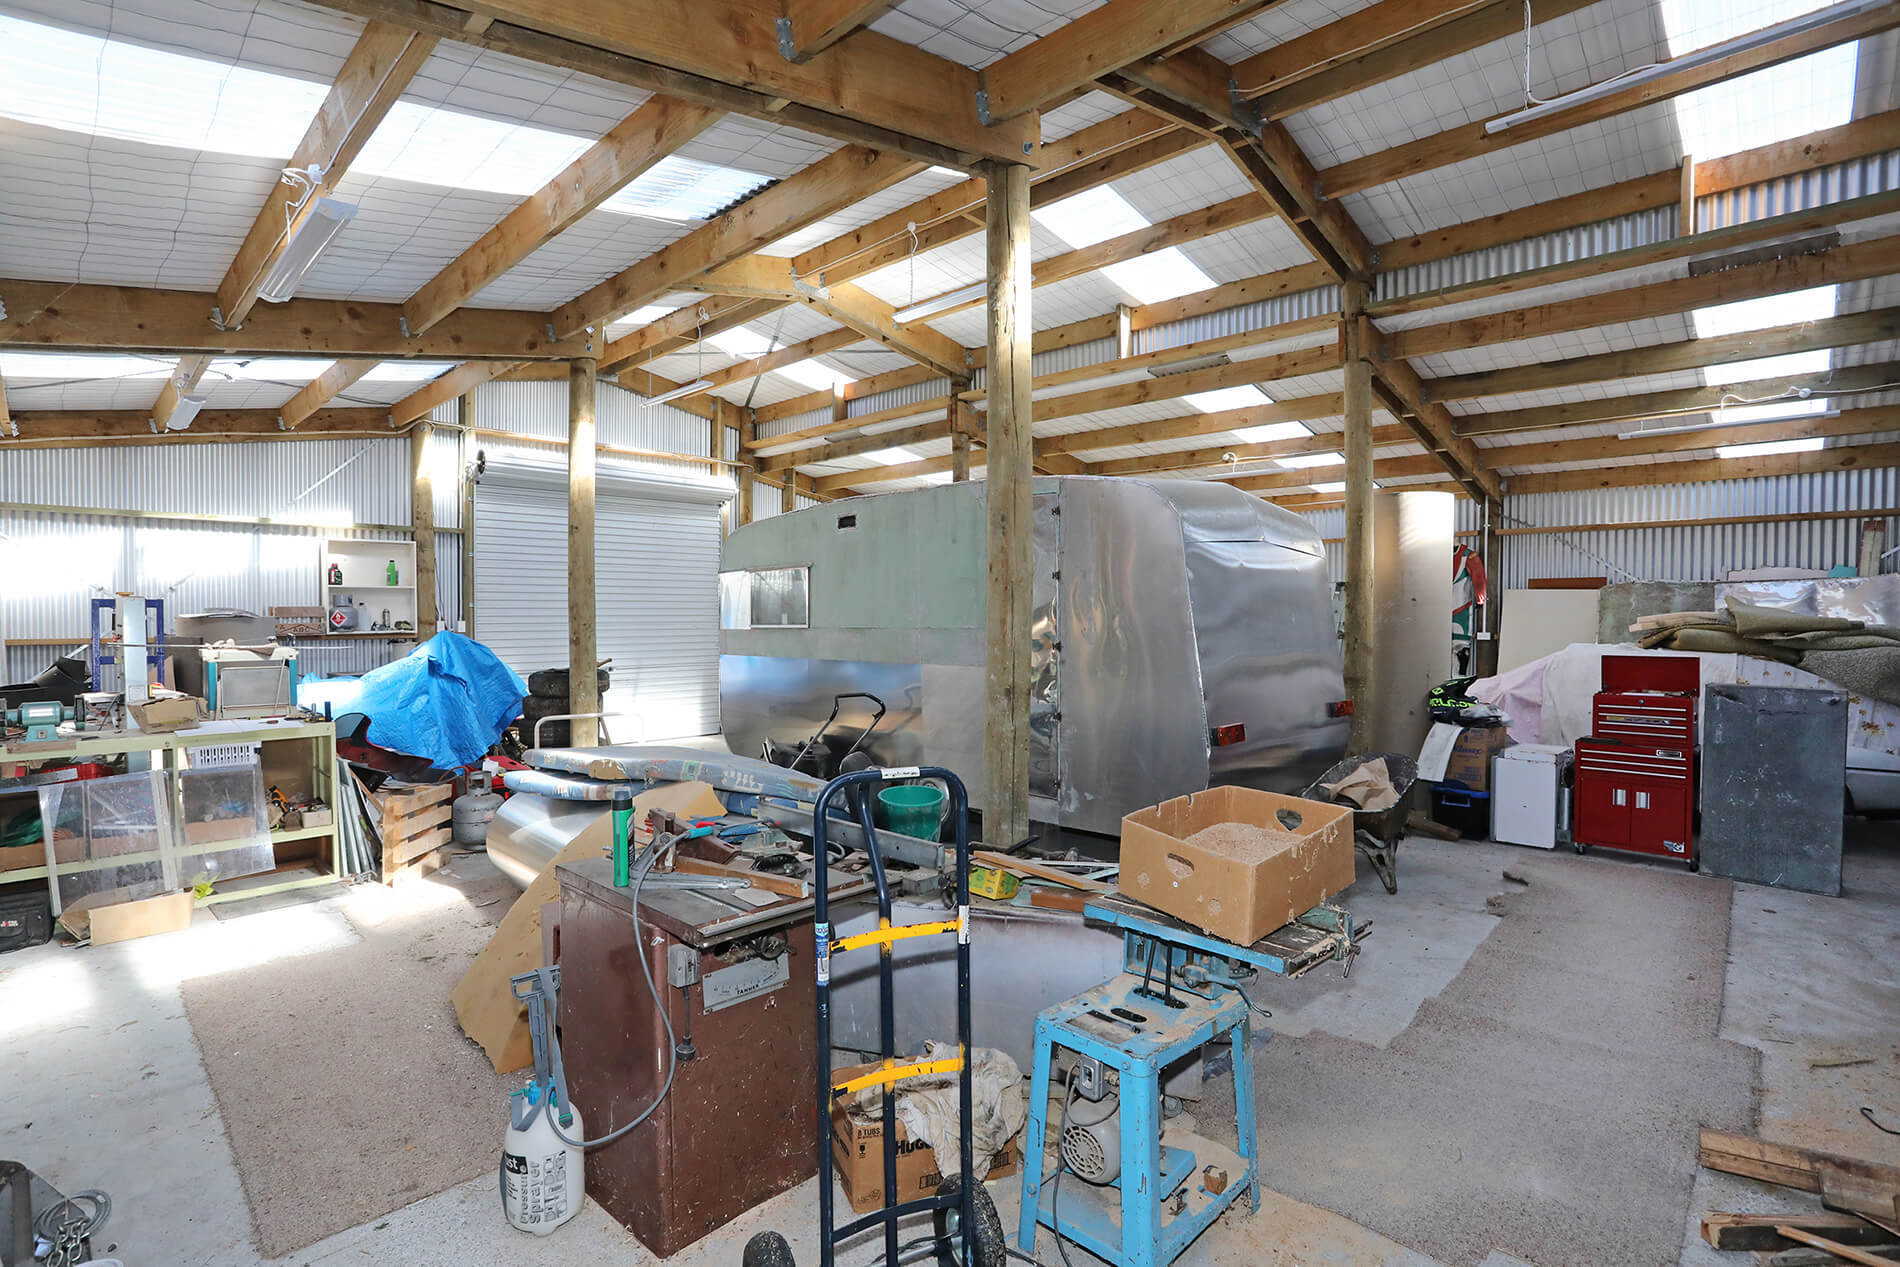 Property Picture: When a Large Shed Matters